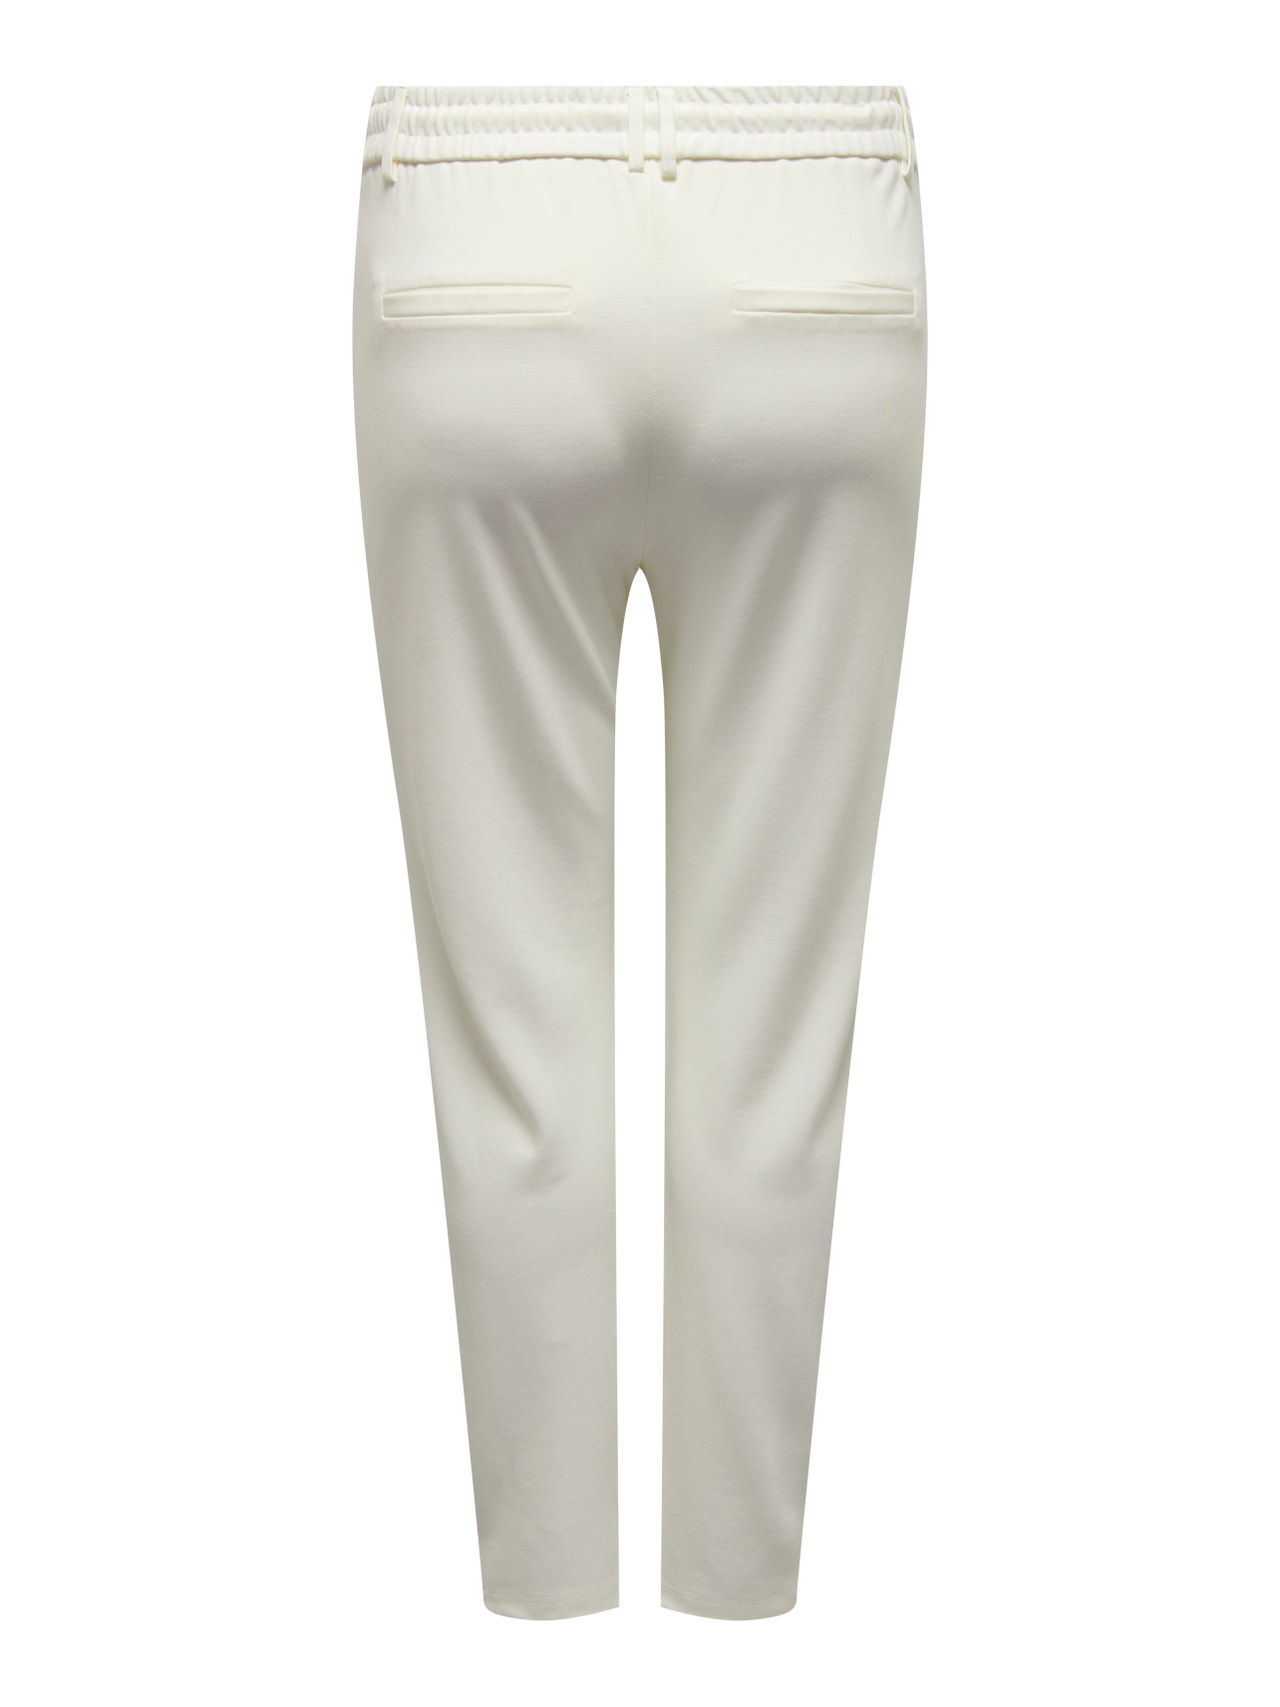 ONLY Regular Fit Trousers -Cloud Dancer - 15287532